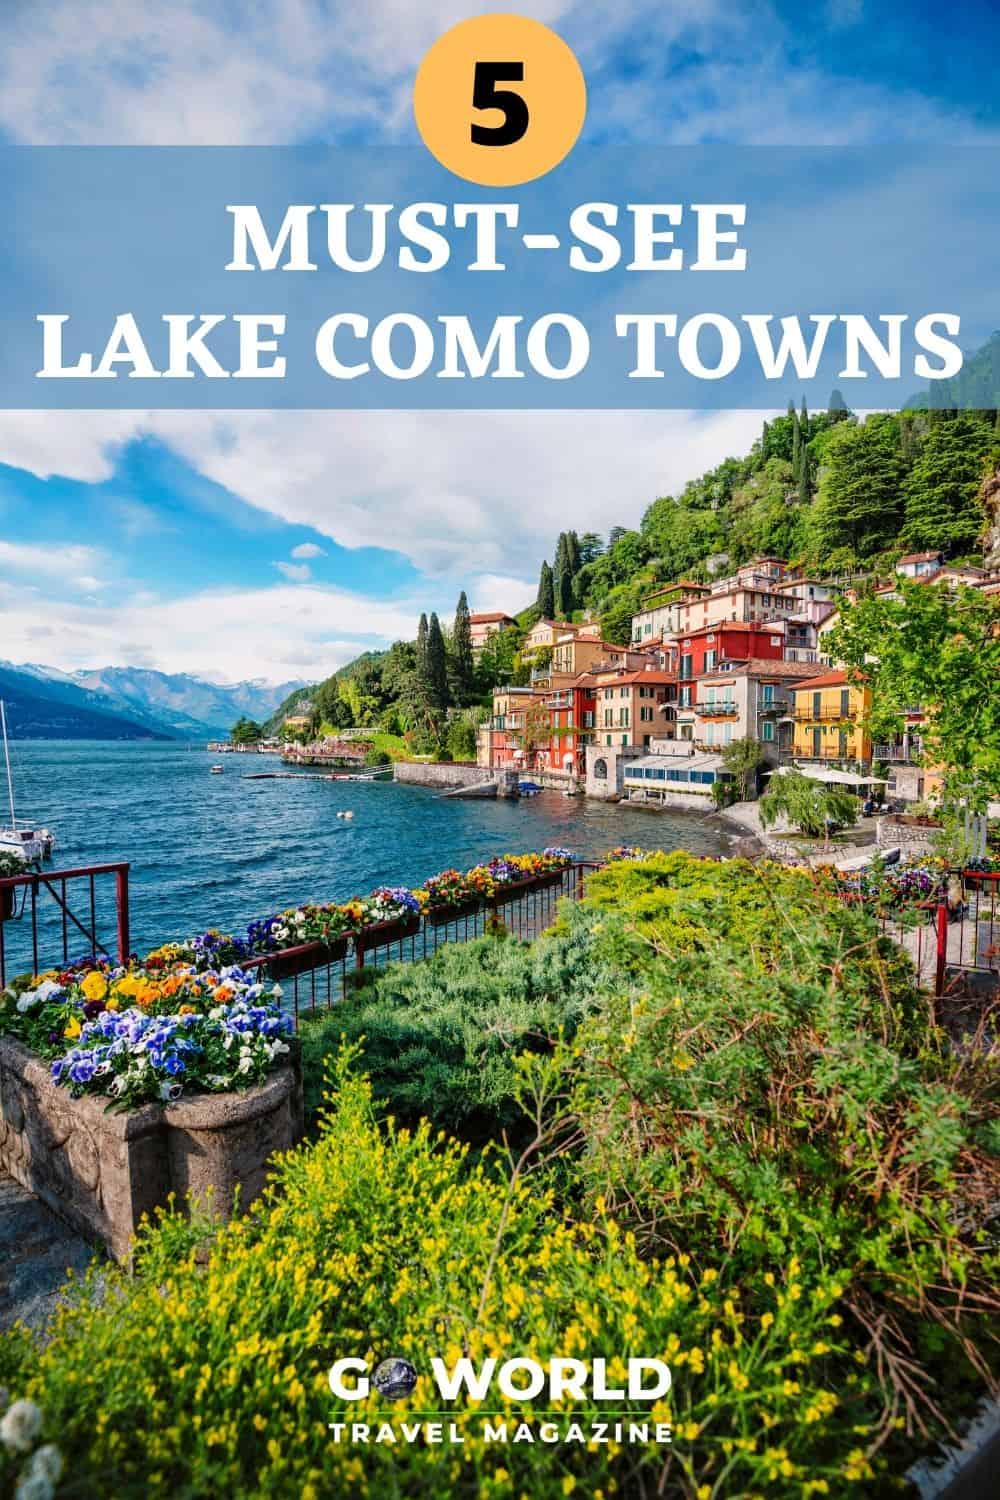 Join the elite and celebrities who have fallen in love with the beautiful and charming Lake Como towns and villages just north of Milan Italy. #italy #lakecomo